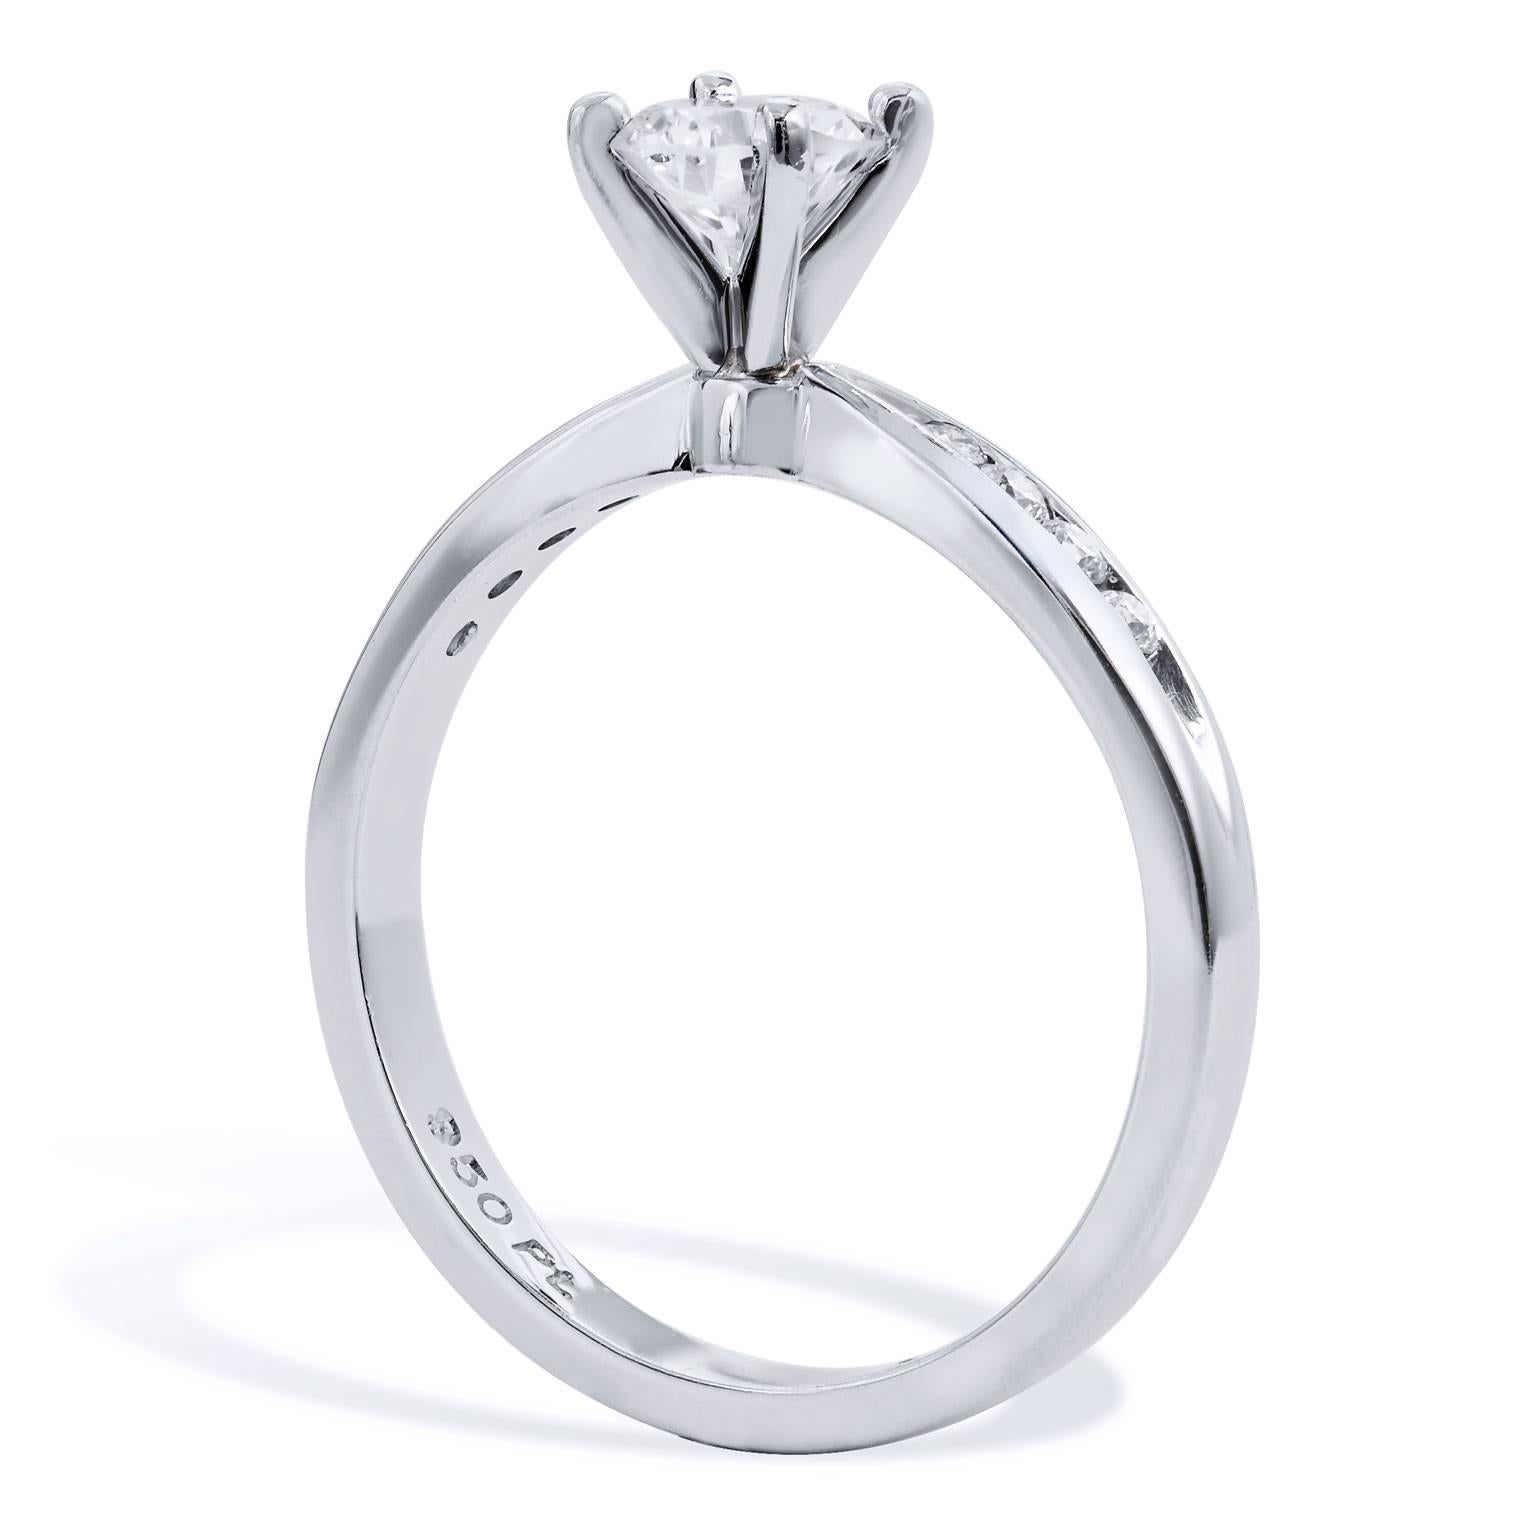 Enjoy this previously loved platinum engagement ring  featuring  a stunning 0.46 carat round diamond set at center, graded H/VS2. Complemented by an additional 0.16 carat of pave set diamonds sweeping the reverse tapered shank (H/I/SI); this is a